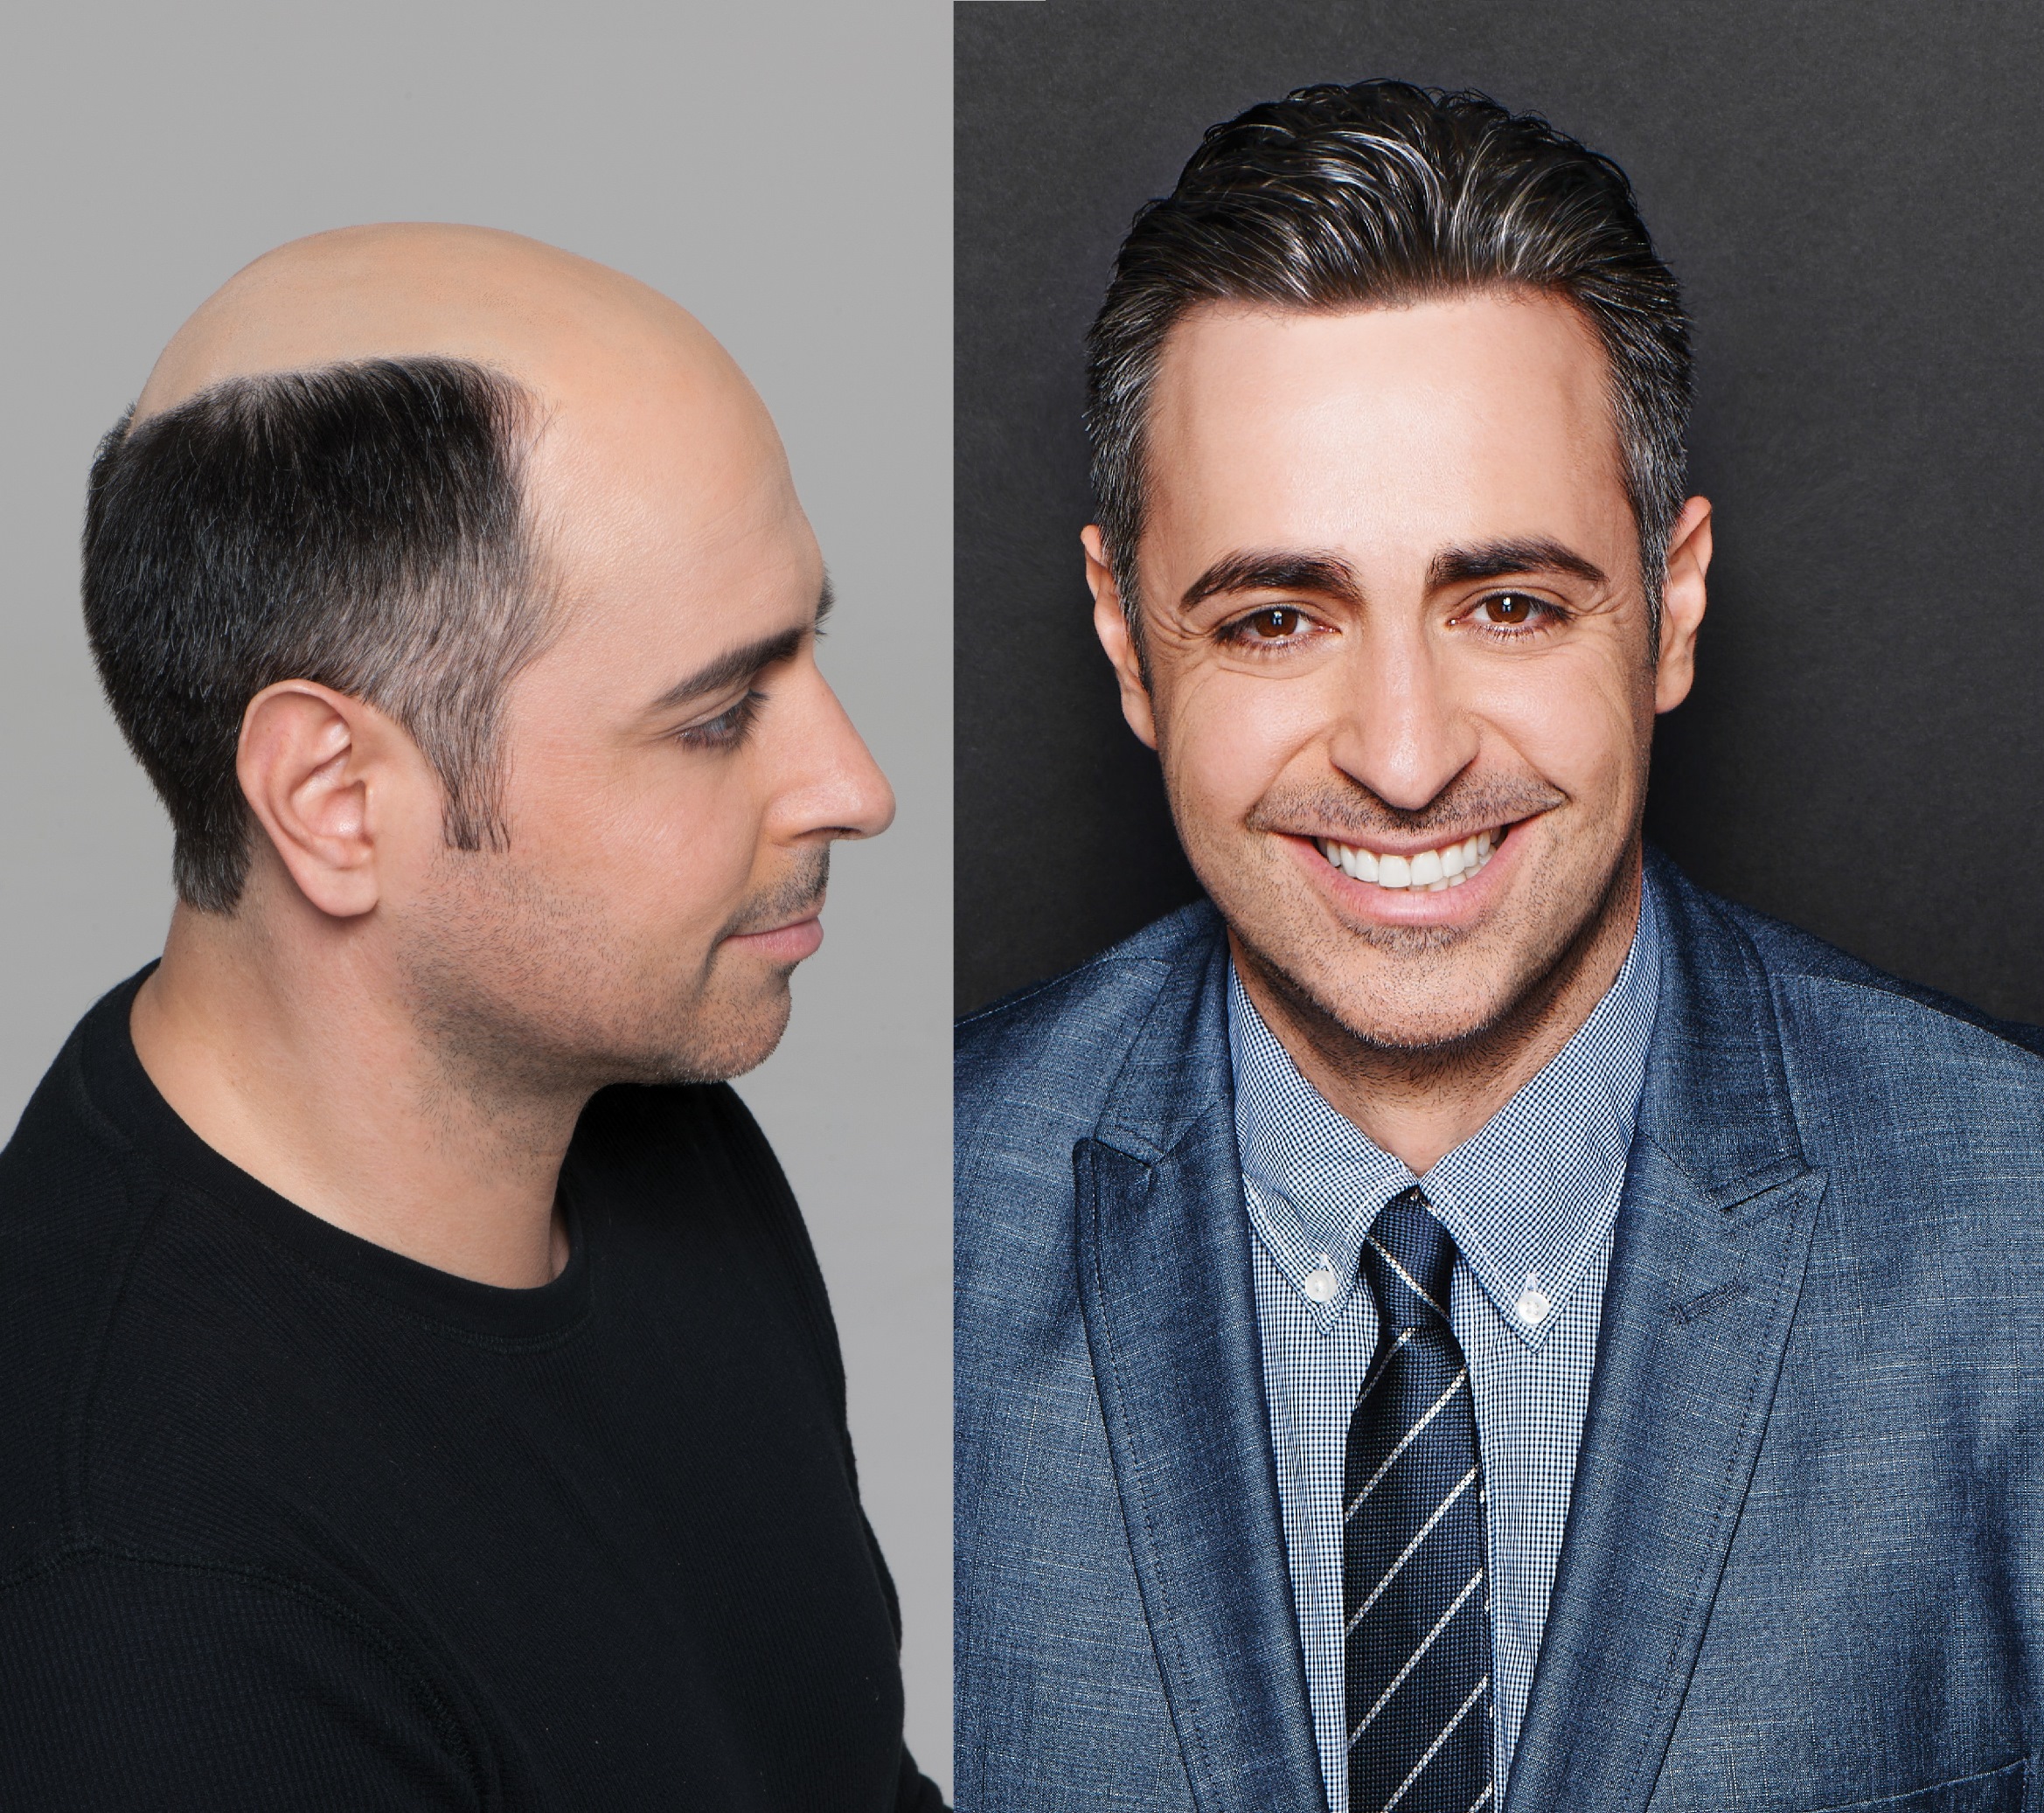 HRC Hair Restoration Of California, 11500 W Olympic Blvd Ste 330, HRC- Hair  Restoration of California was established in 1990. We operate two locations  in Los Angeles County, one in West Los